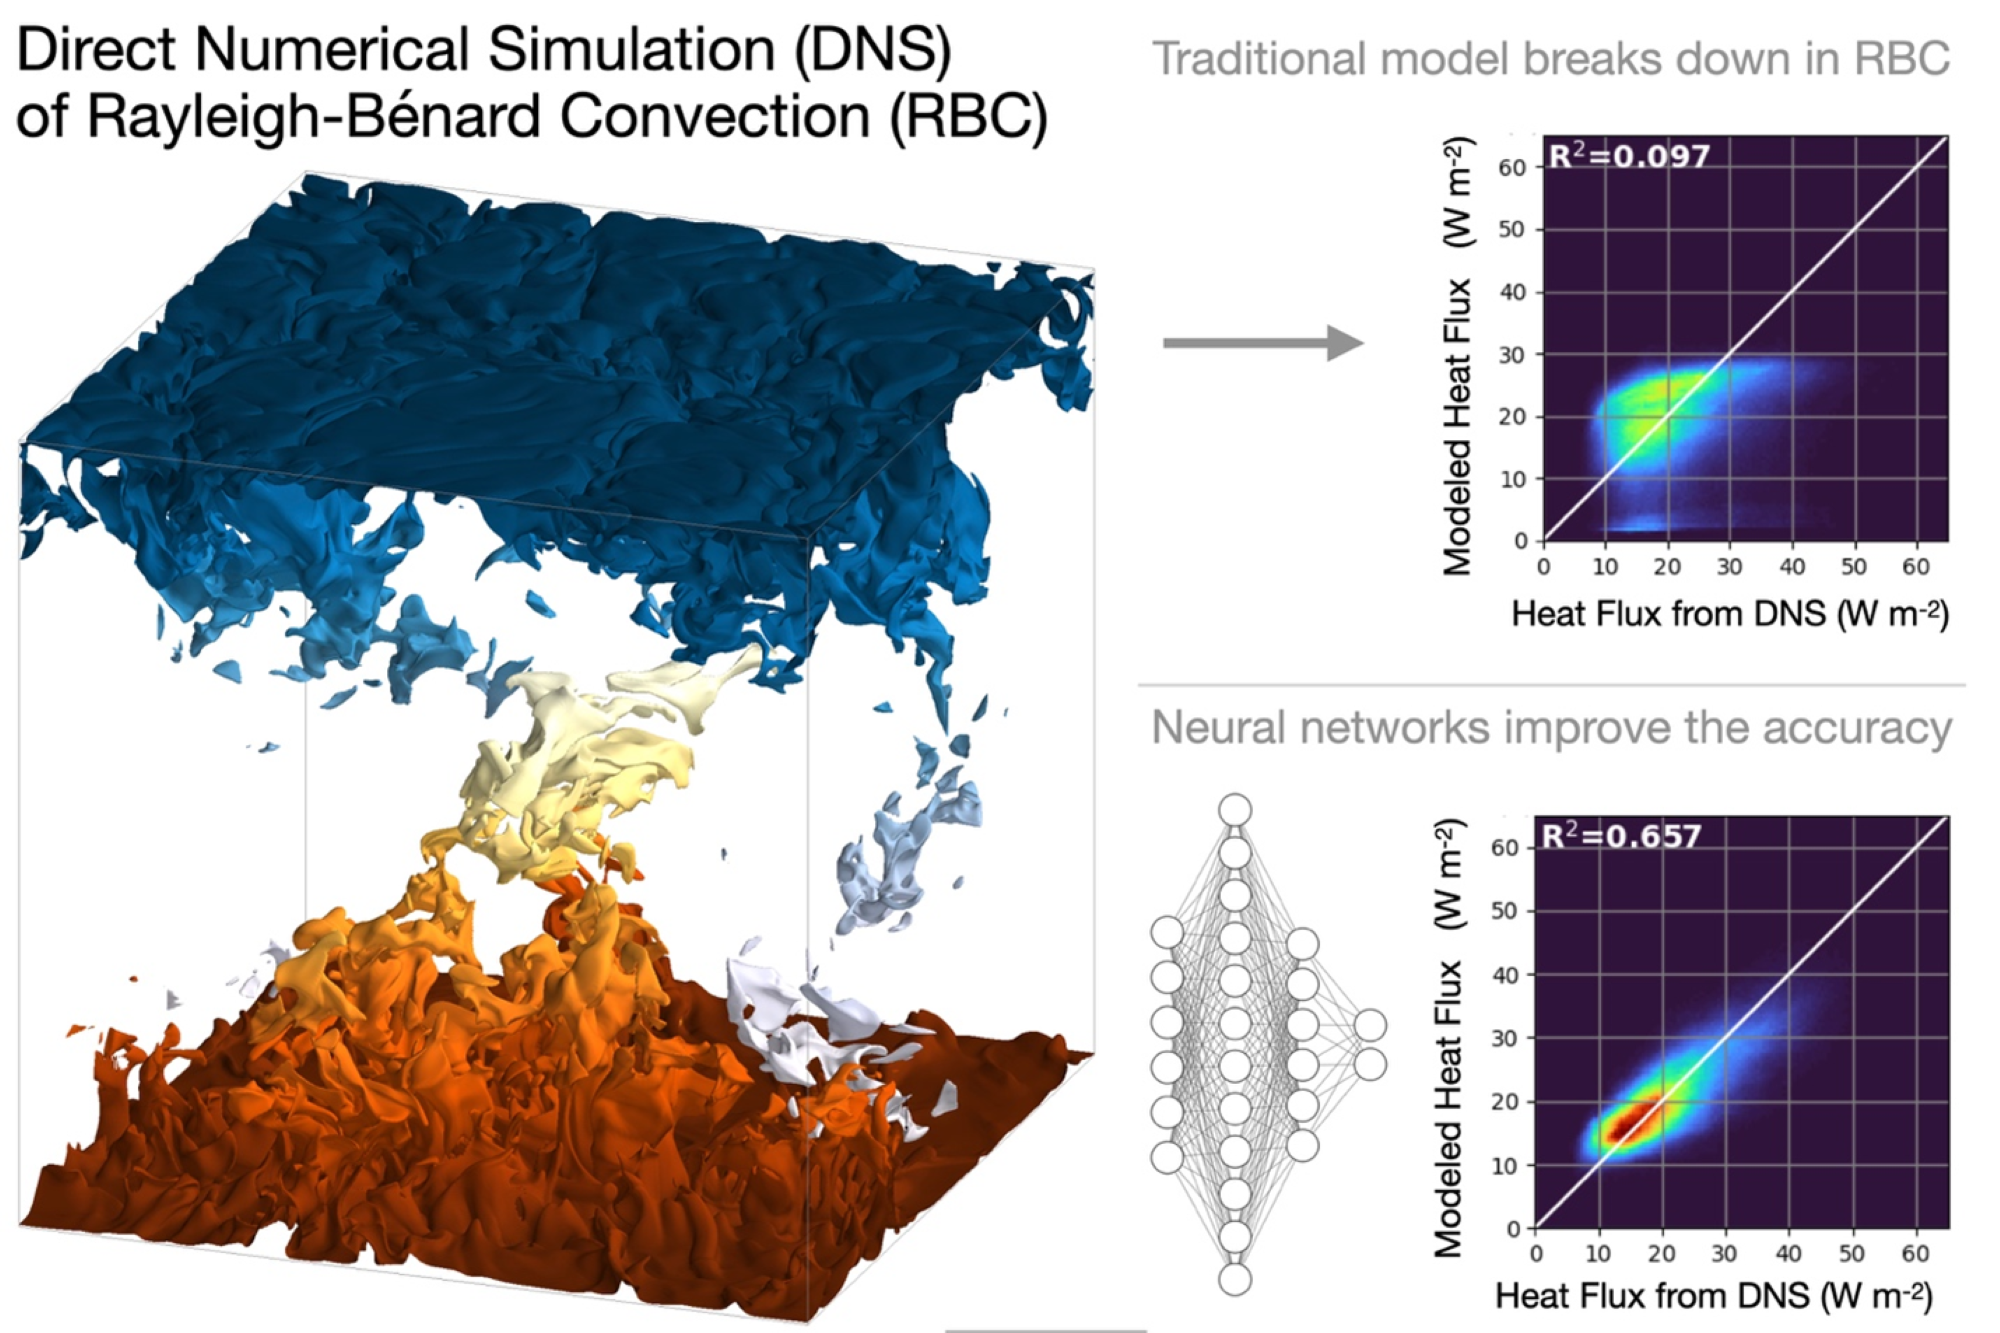 Model results from direct numerical simulation.